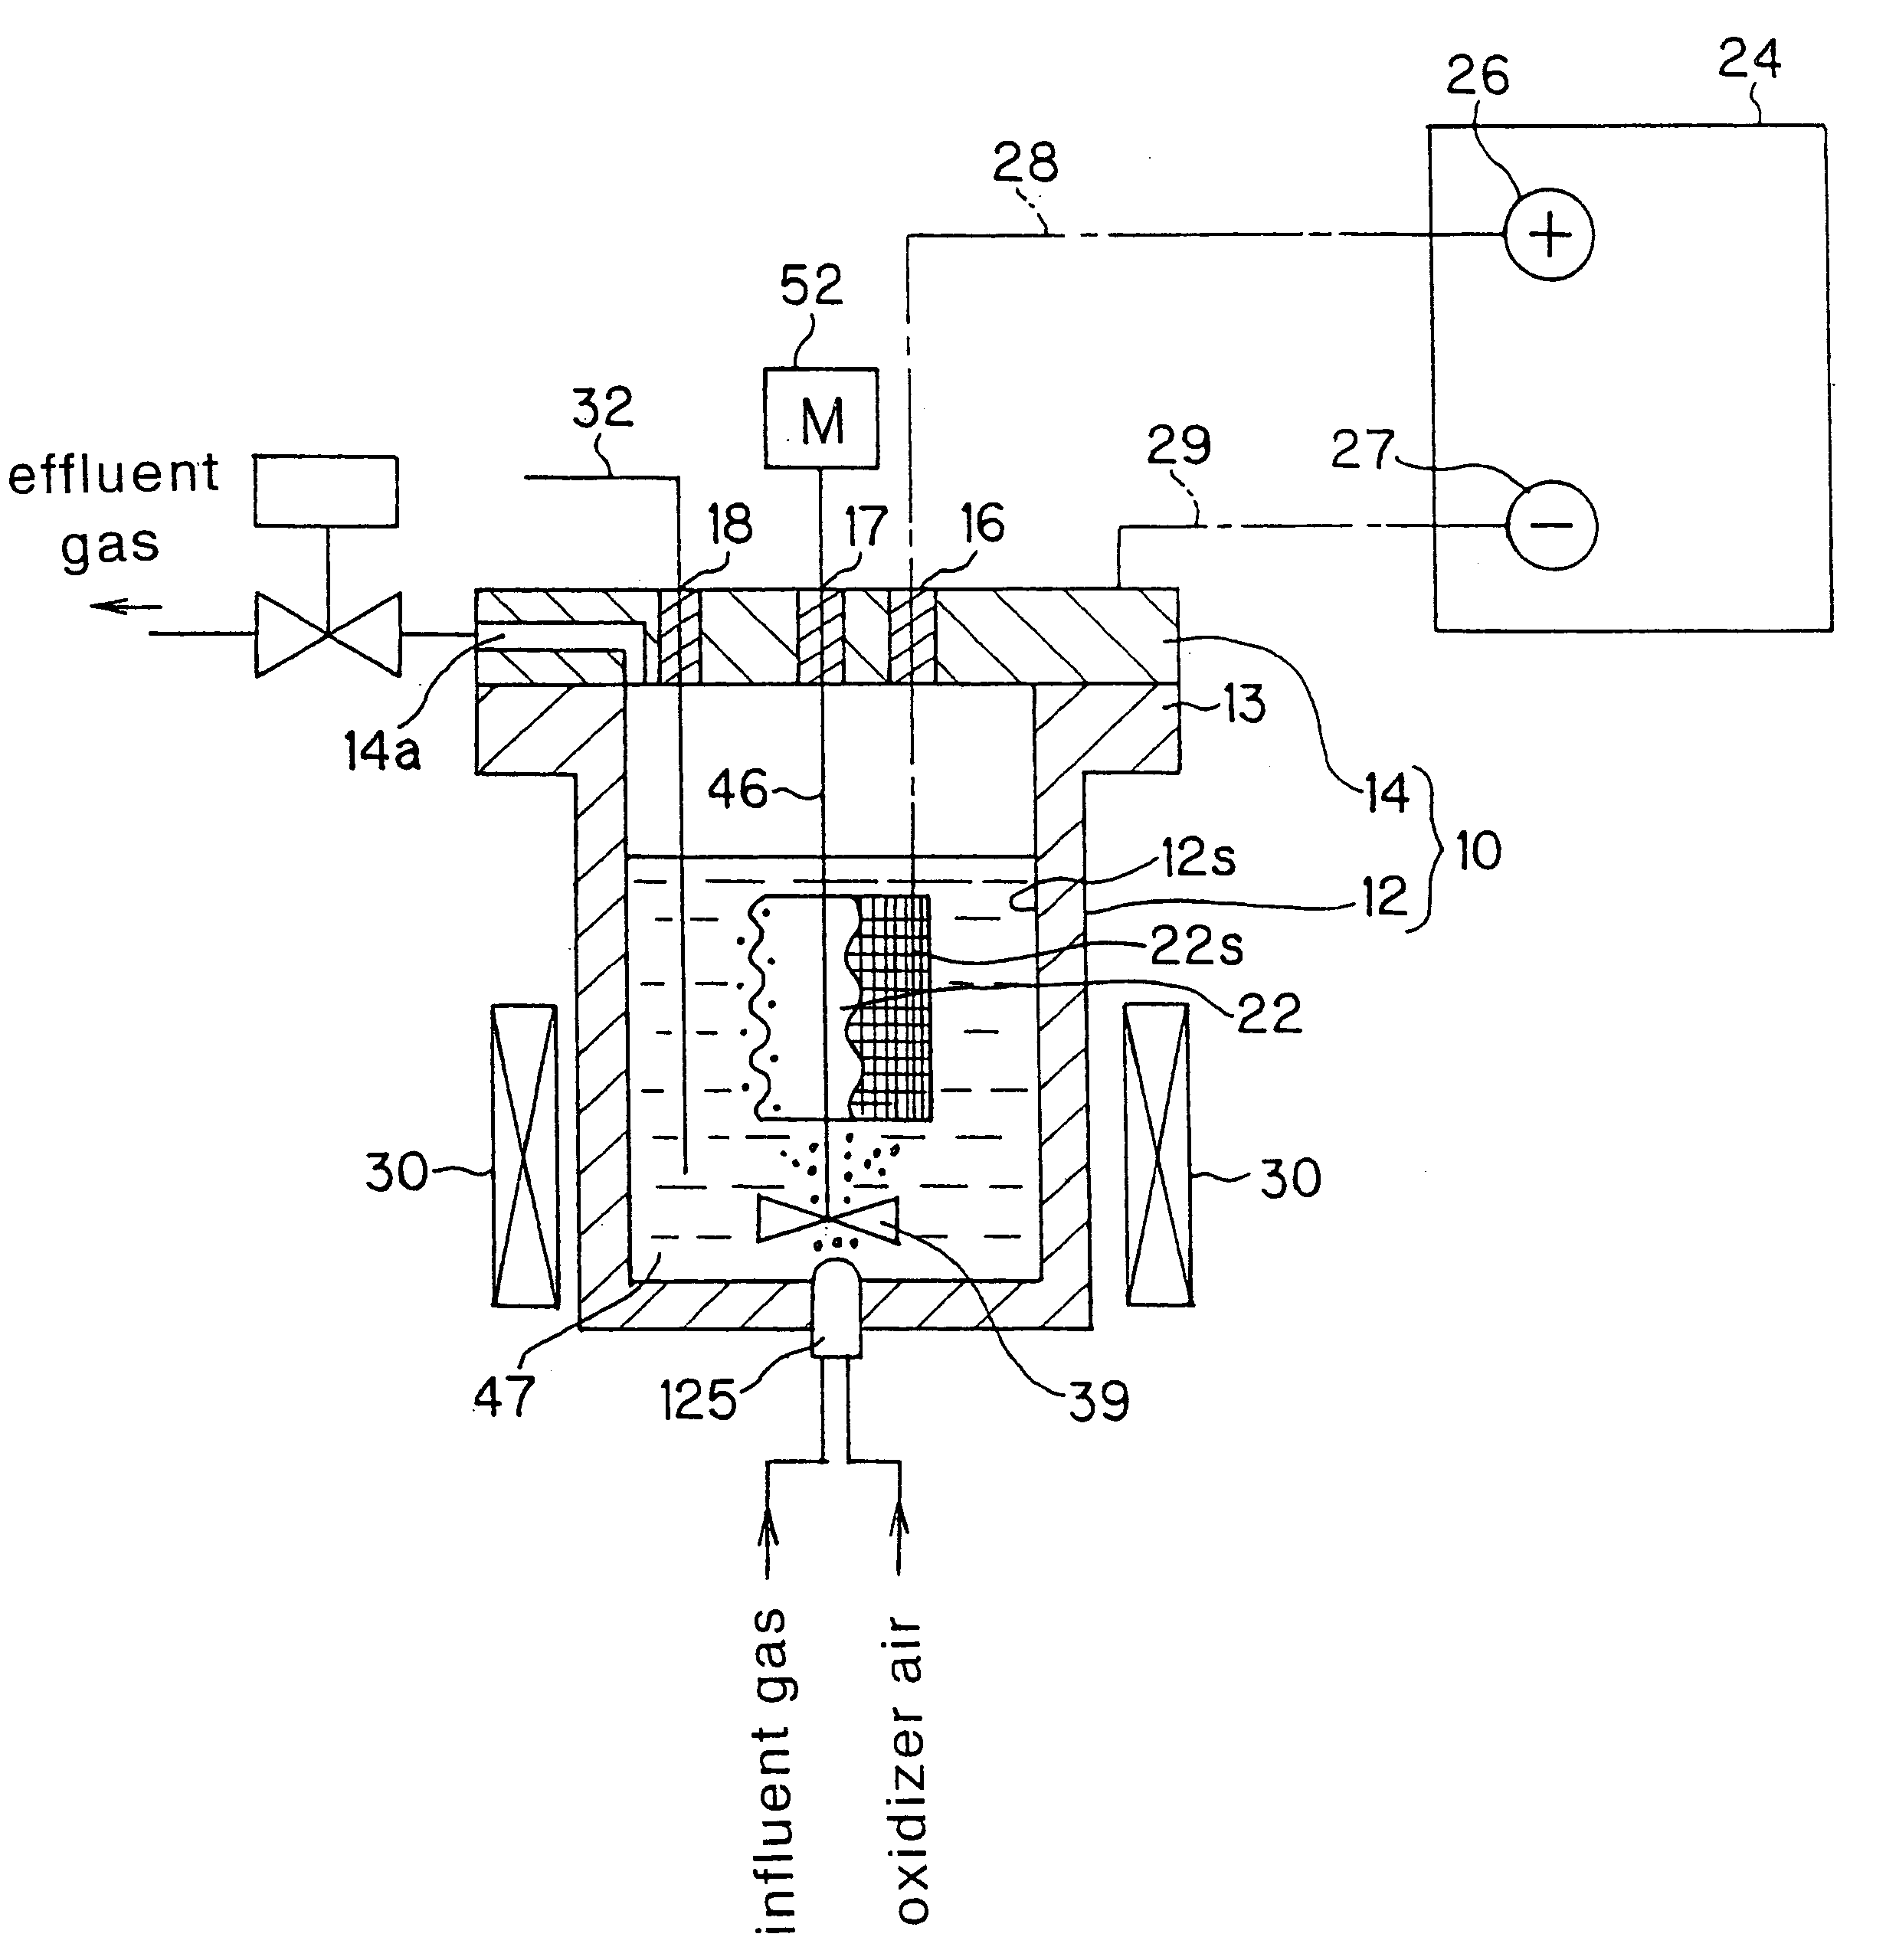 Method and apparatus for treatment of gas by hydrothermal electrolysis